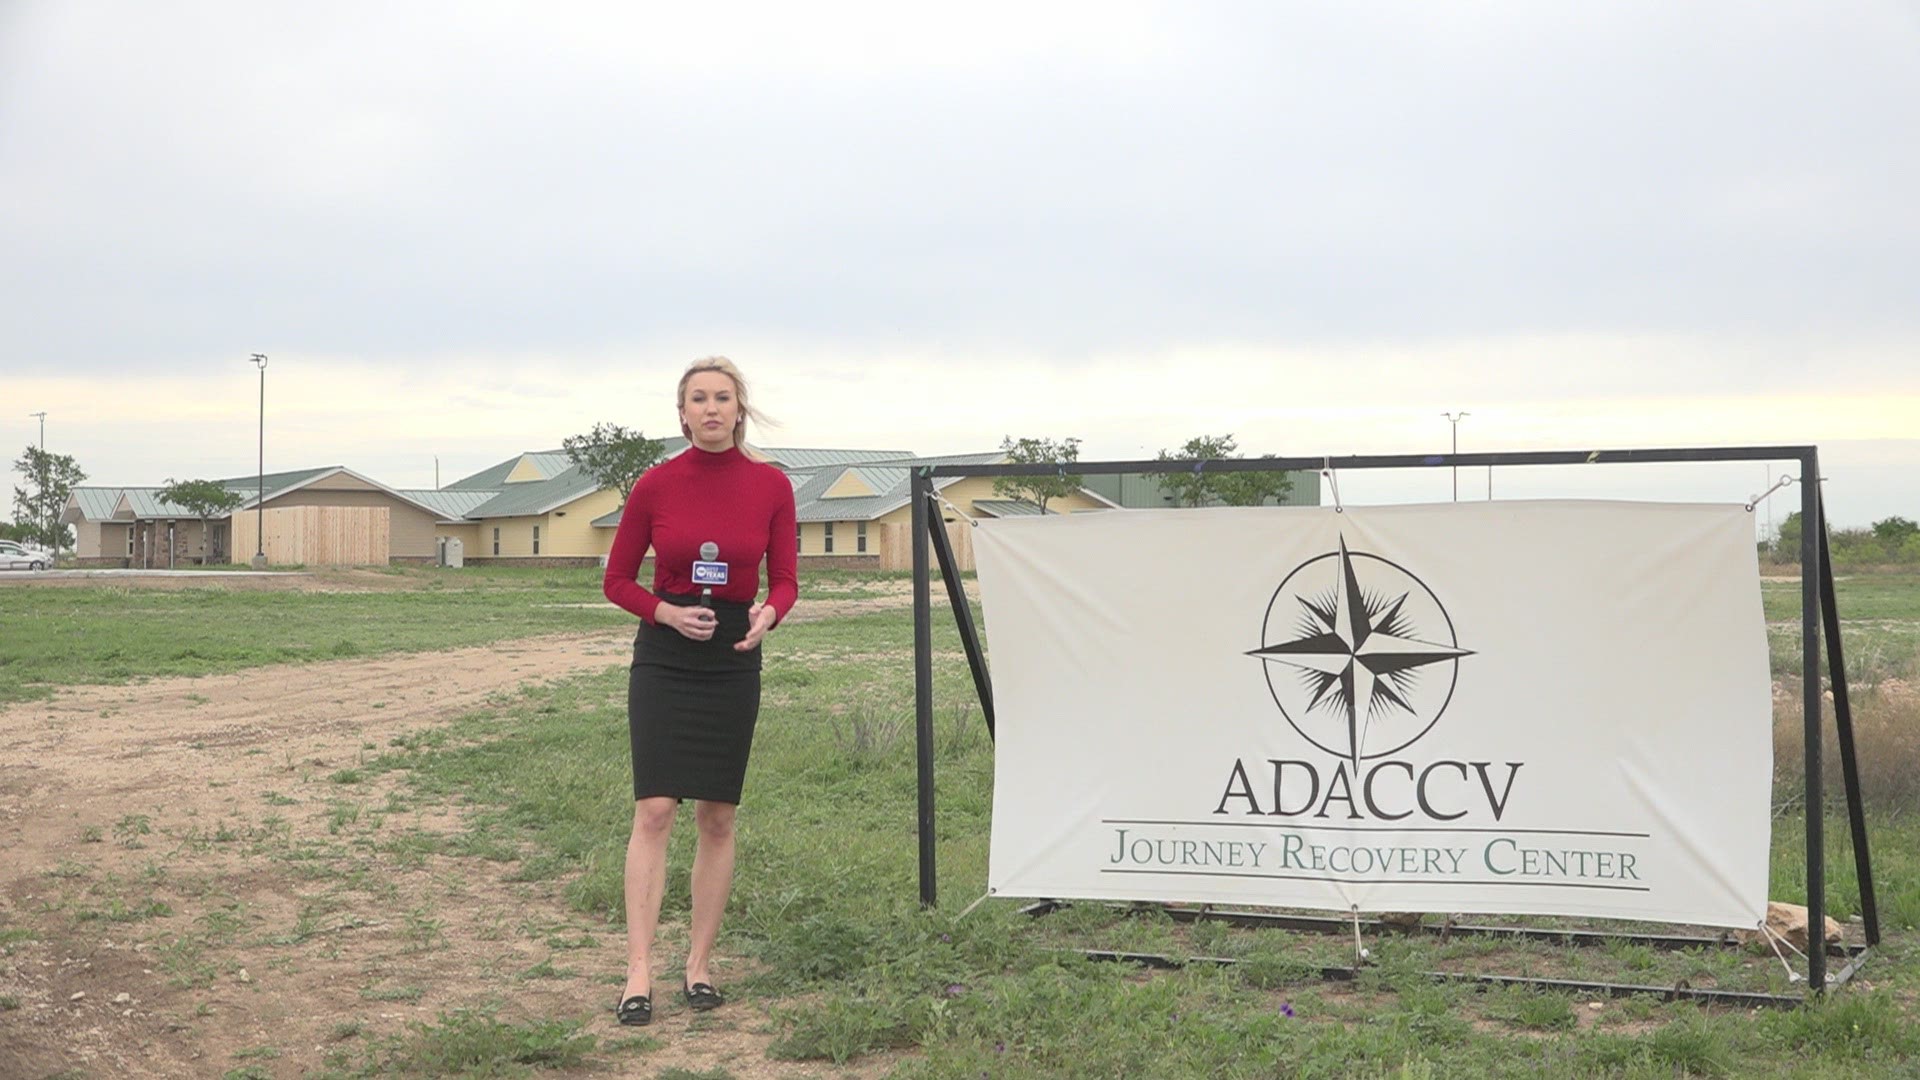 ADACCV's Journey Recovery Center is the first state-funded detox and rehabilitation program in San Angelo.